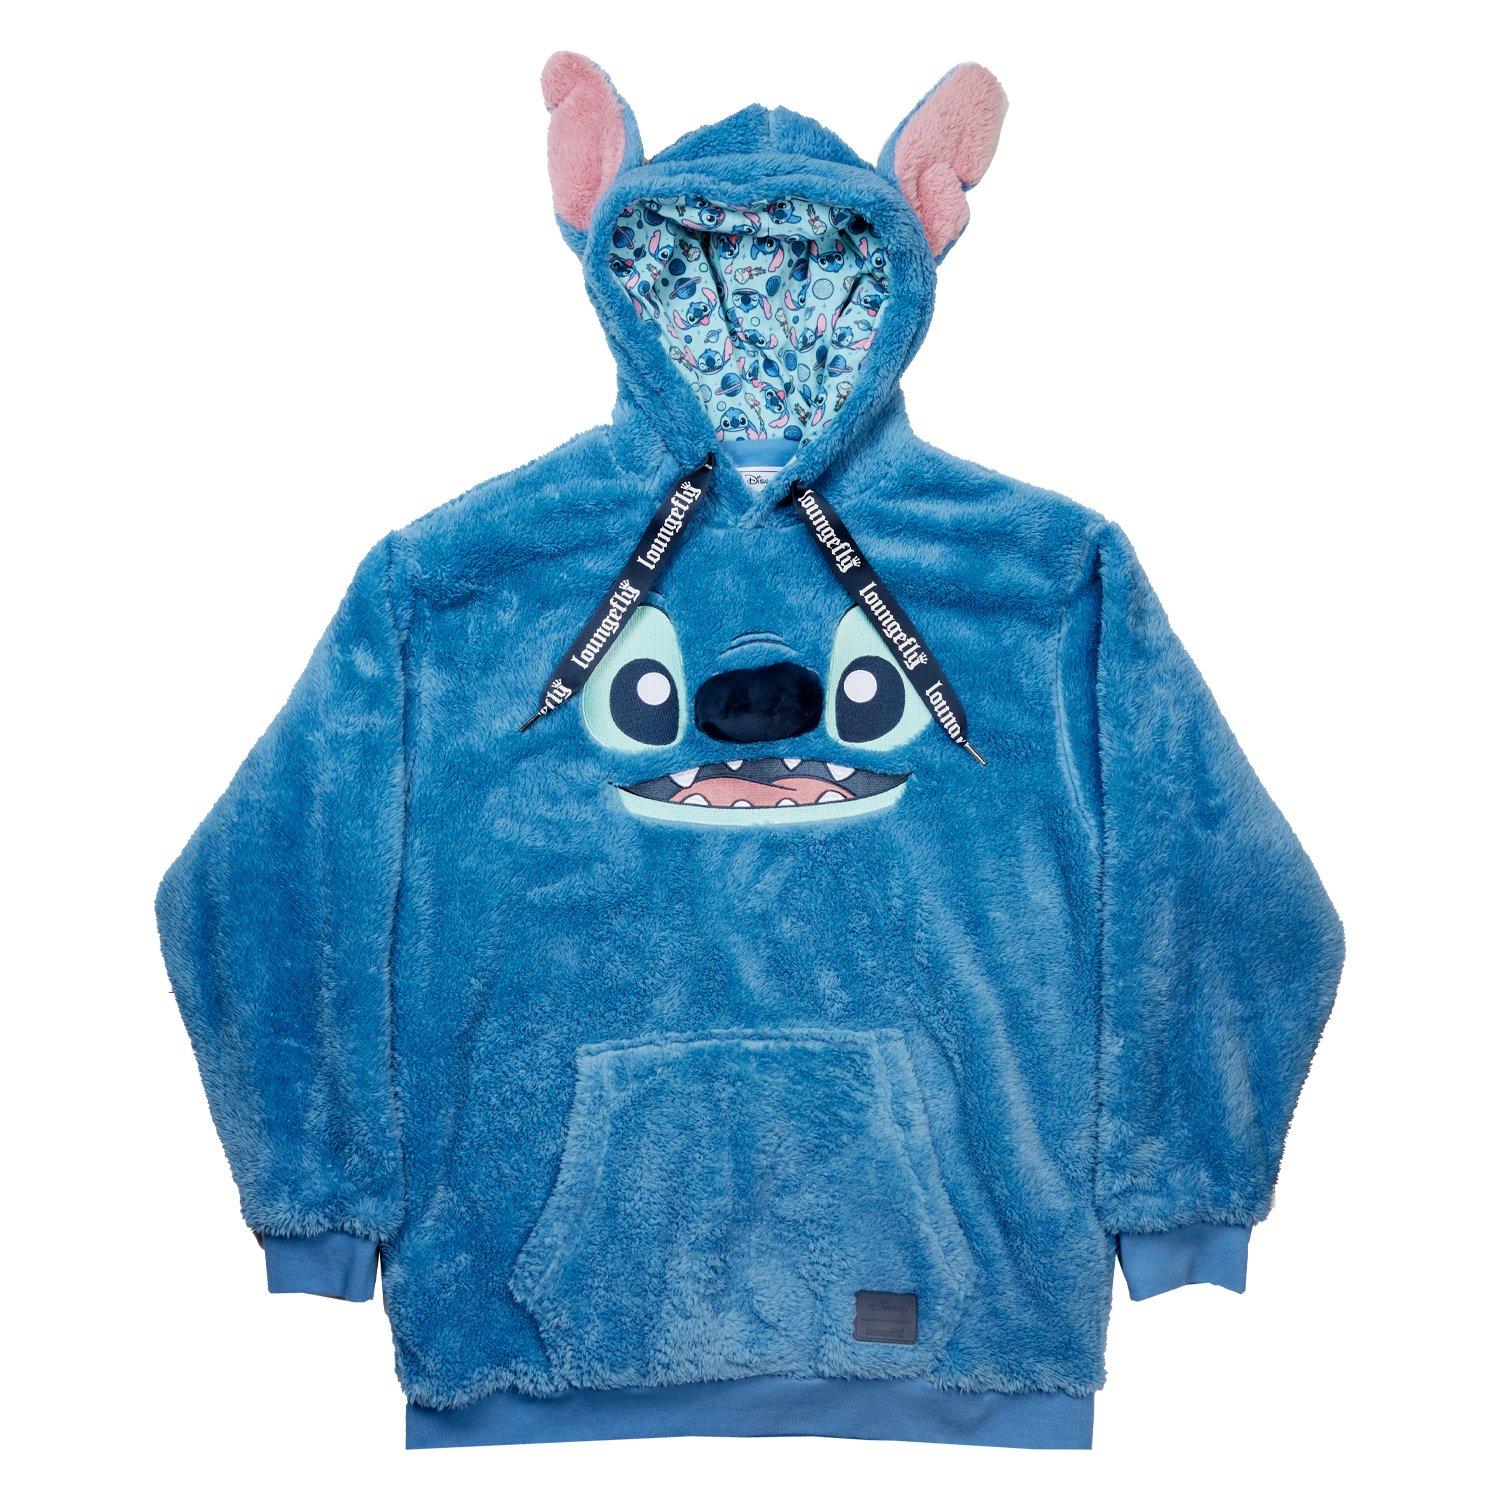 Official Official Lilo & Stitch Clothing, Gifts & Merchandise